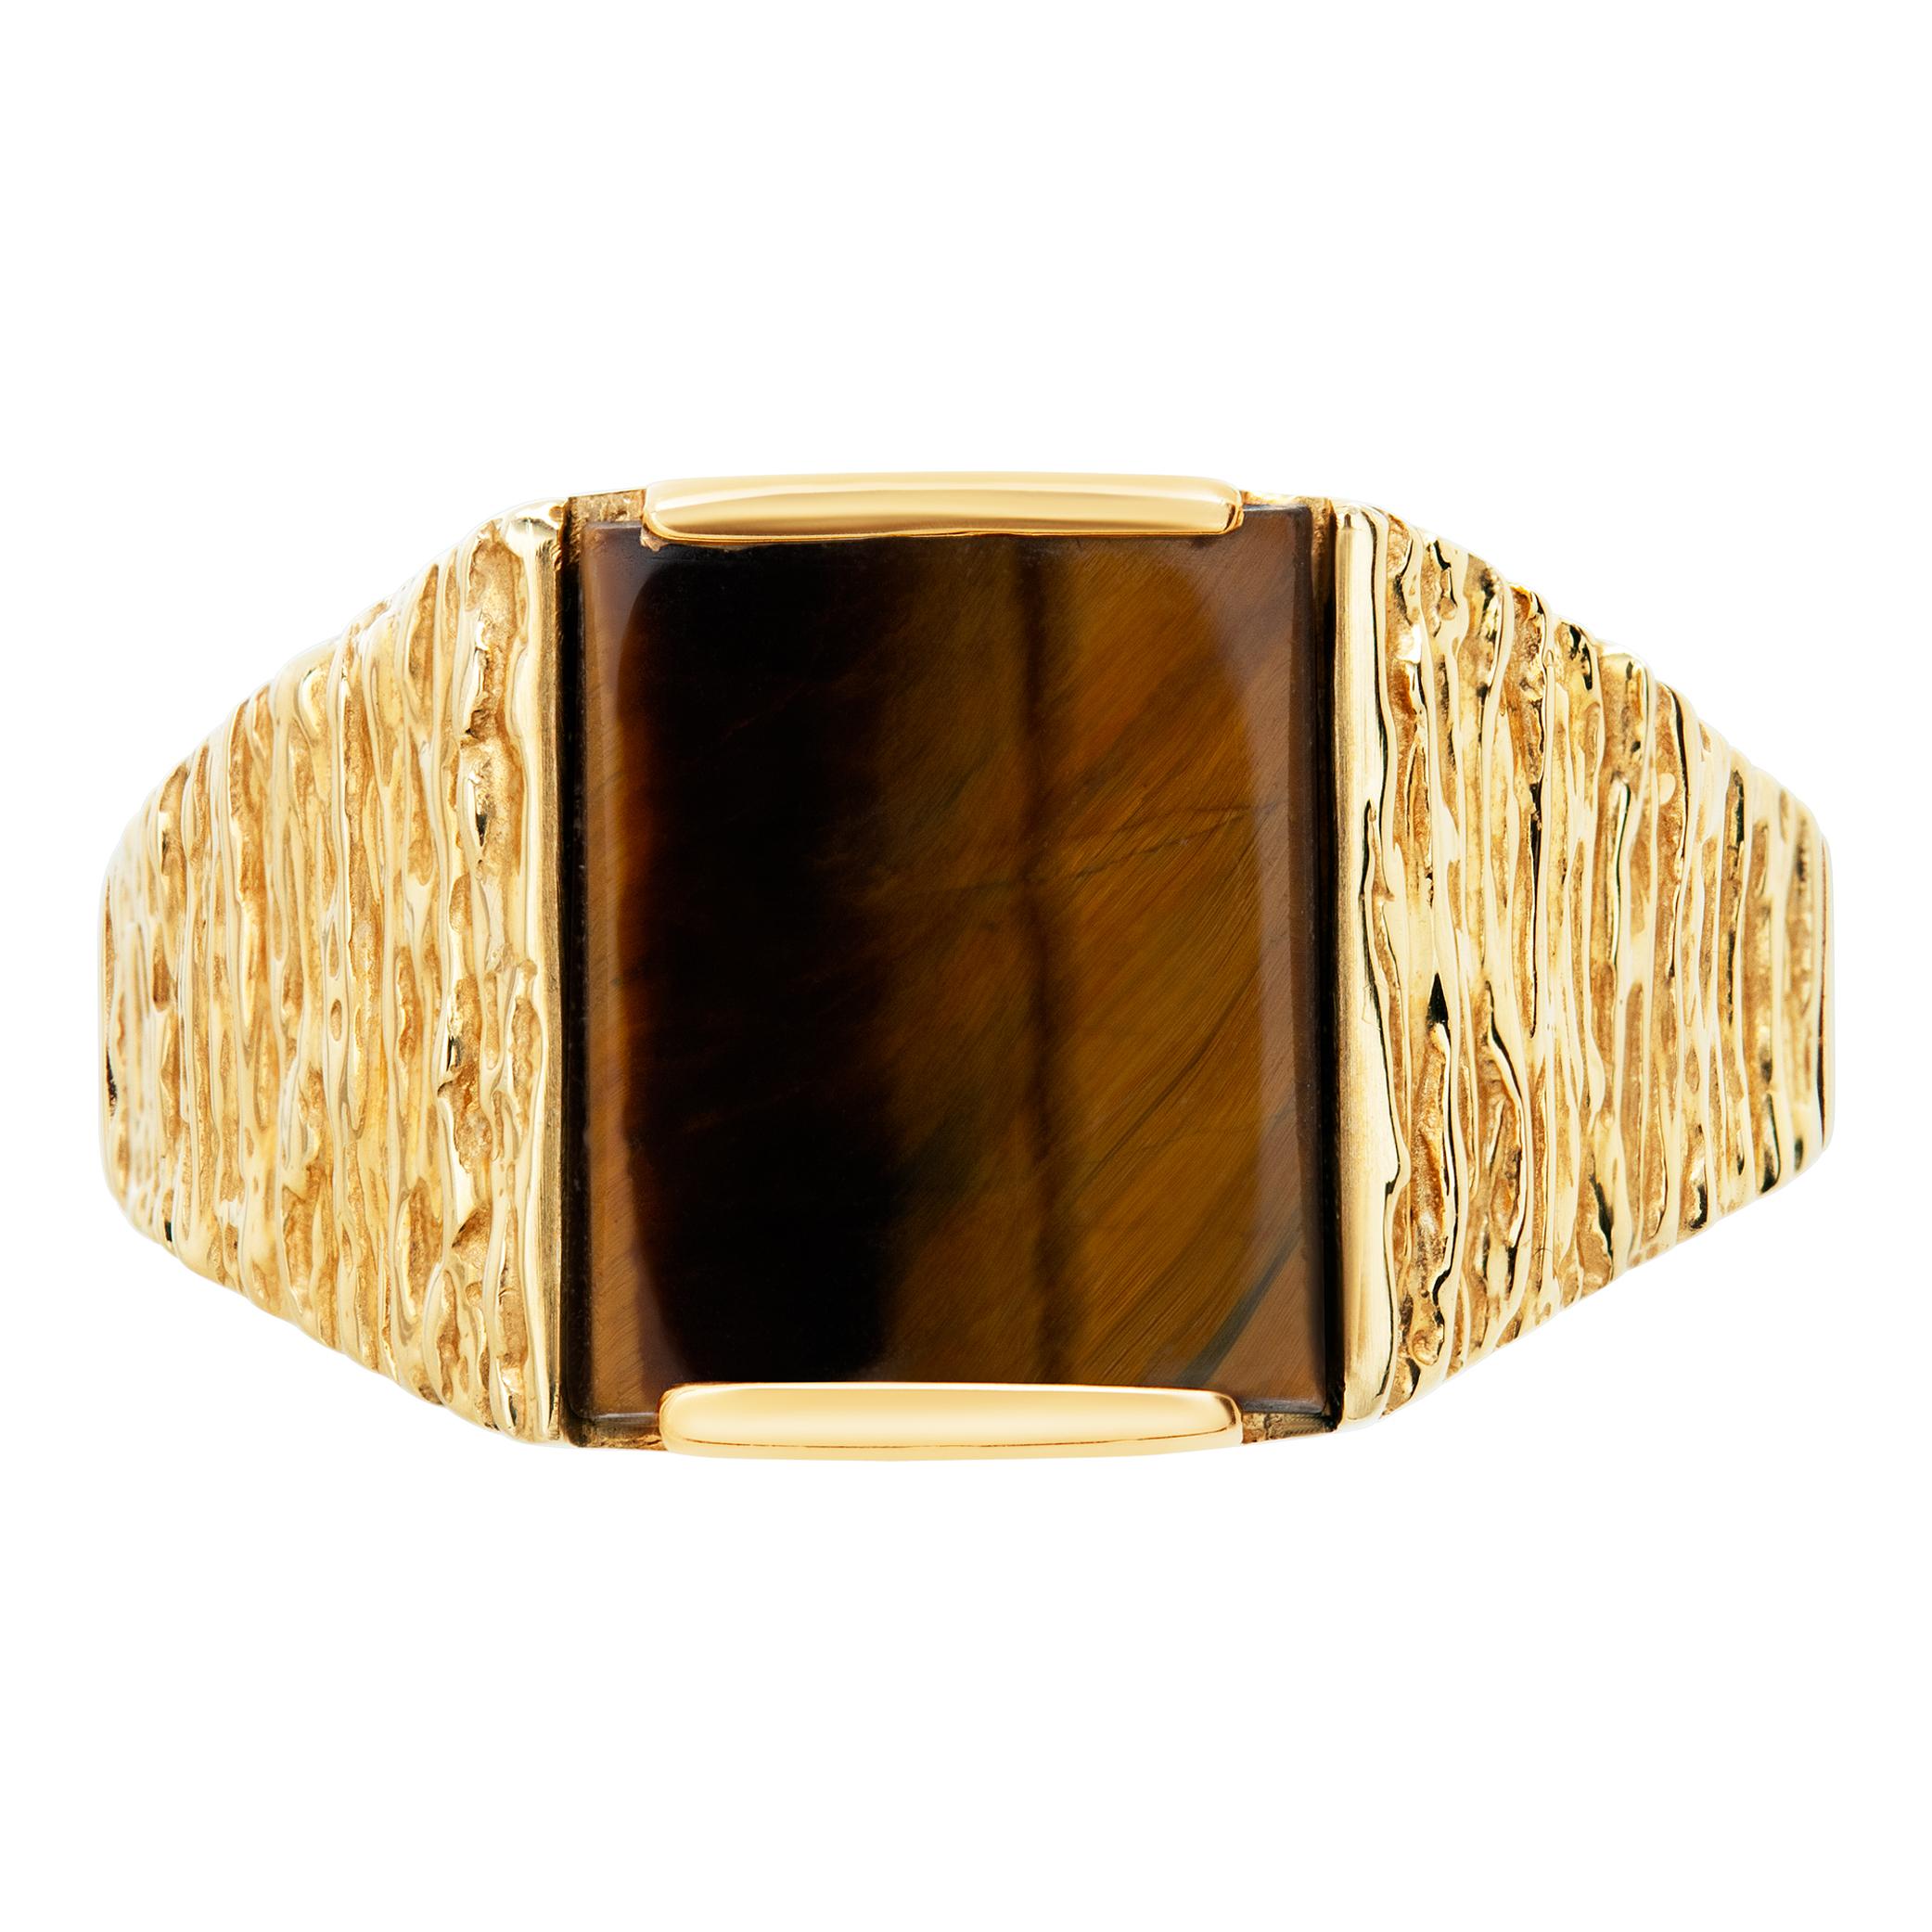 Mens bark finish ring in 14k yellow gold with center tiger eye stone. Size 10.25.This ring is currently size 10.25 and some items can be sized up or down, please ask! It weighs 5.2 pennyweights and is 14k.
